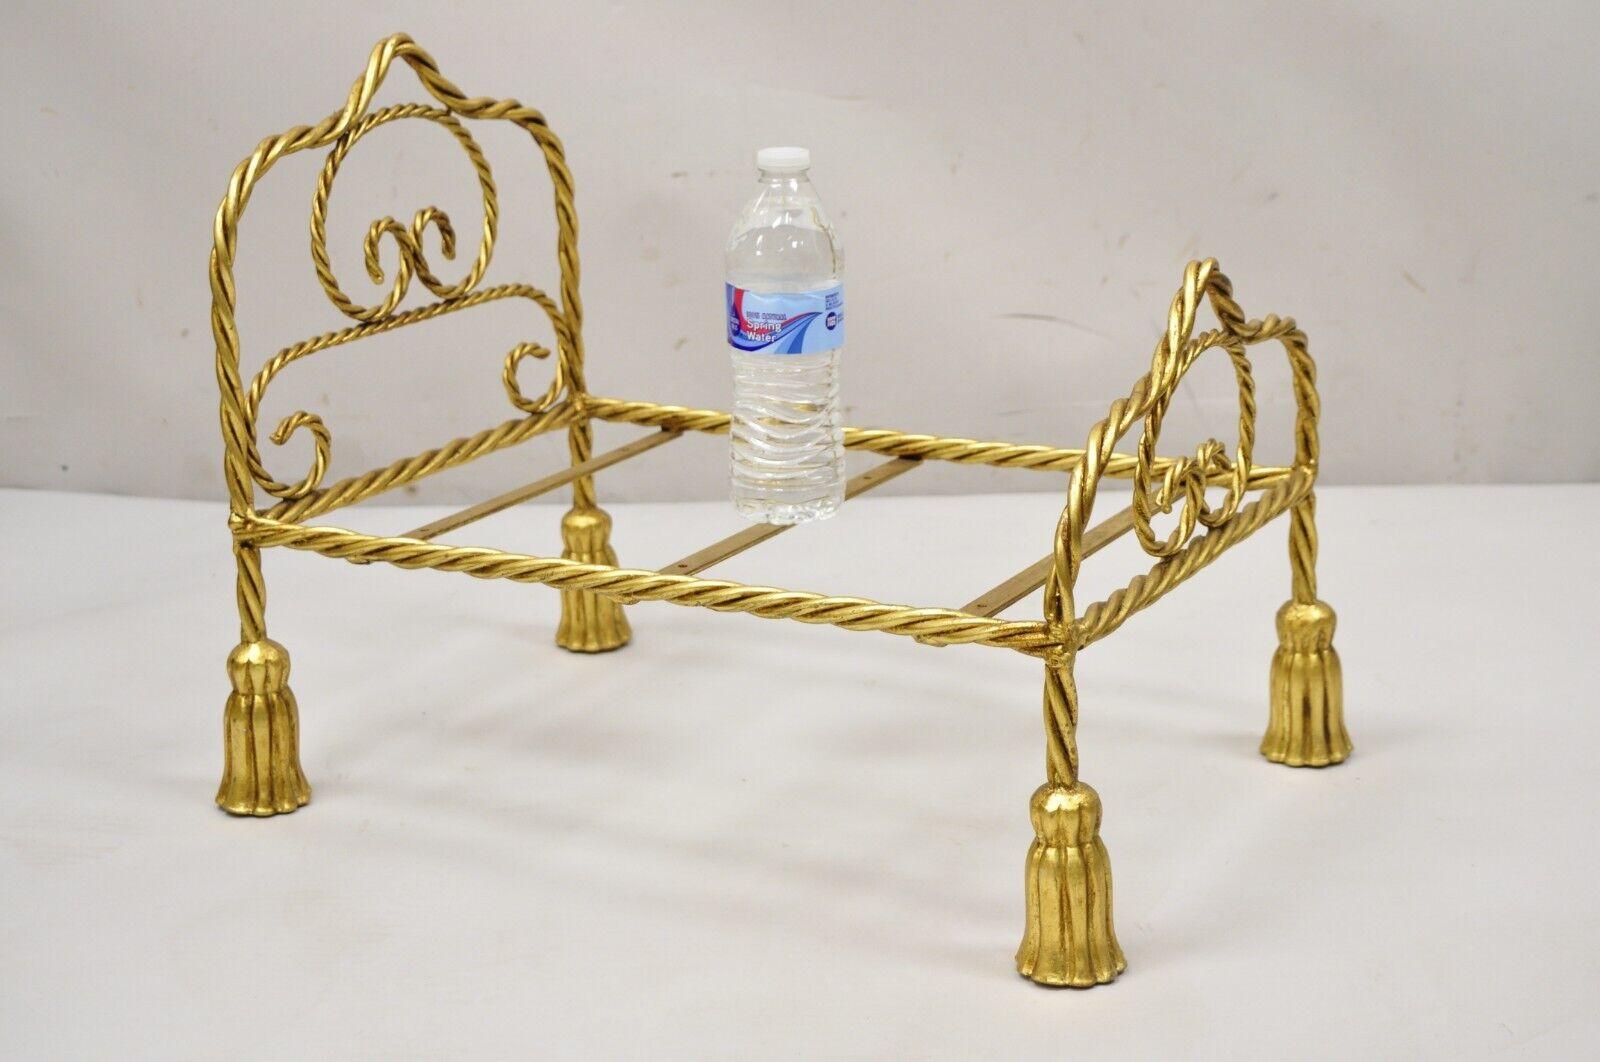 Vintage Italian Hollywood Regency Iron Tassel Frame Pet Cat Dog Bed or Doll Bed. Item featured is a nice size for small pets or doll display, gold leaf gilt finish, iron metal scrolling frame, tassel form feet, very nice vintage item, quality